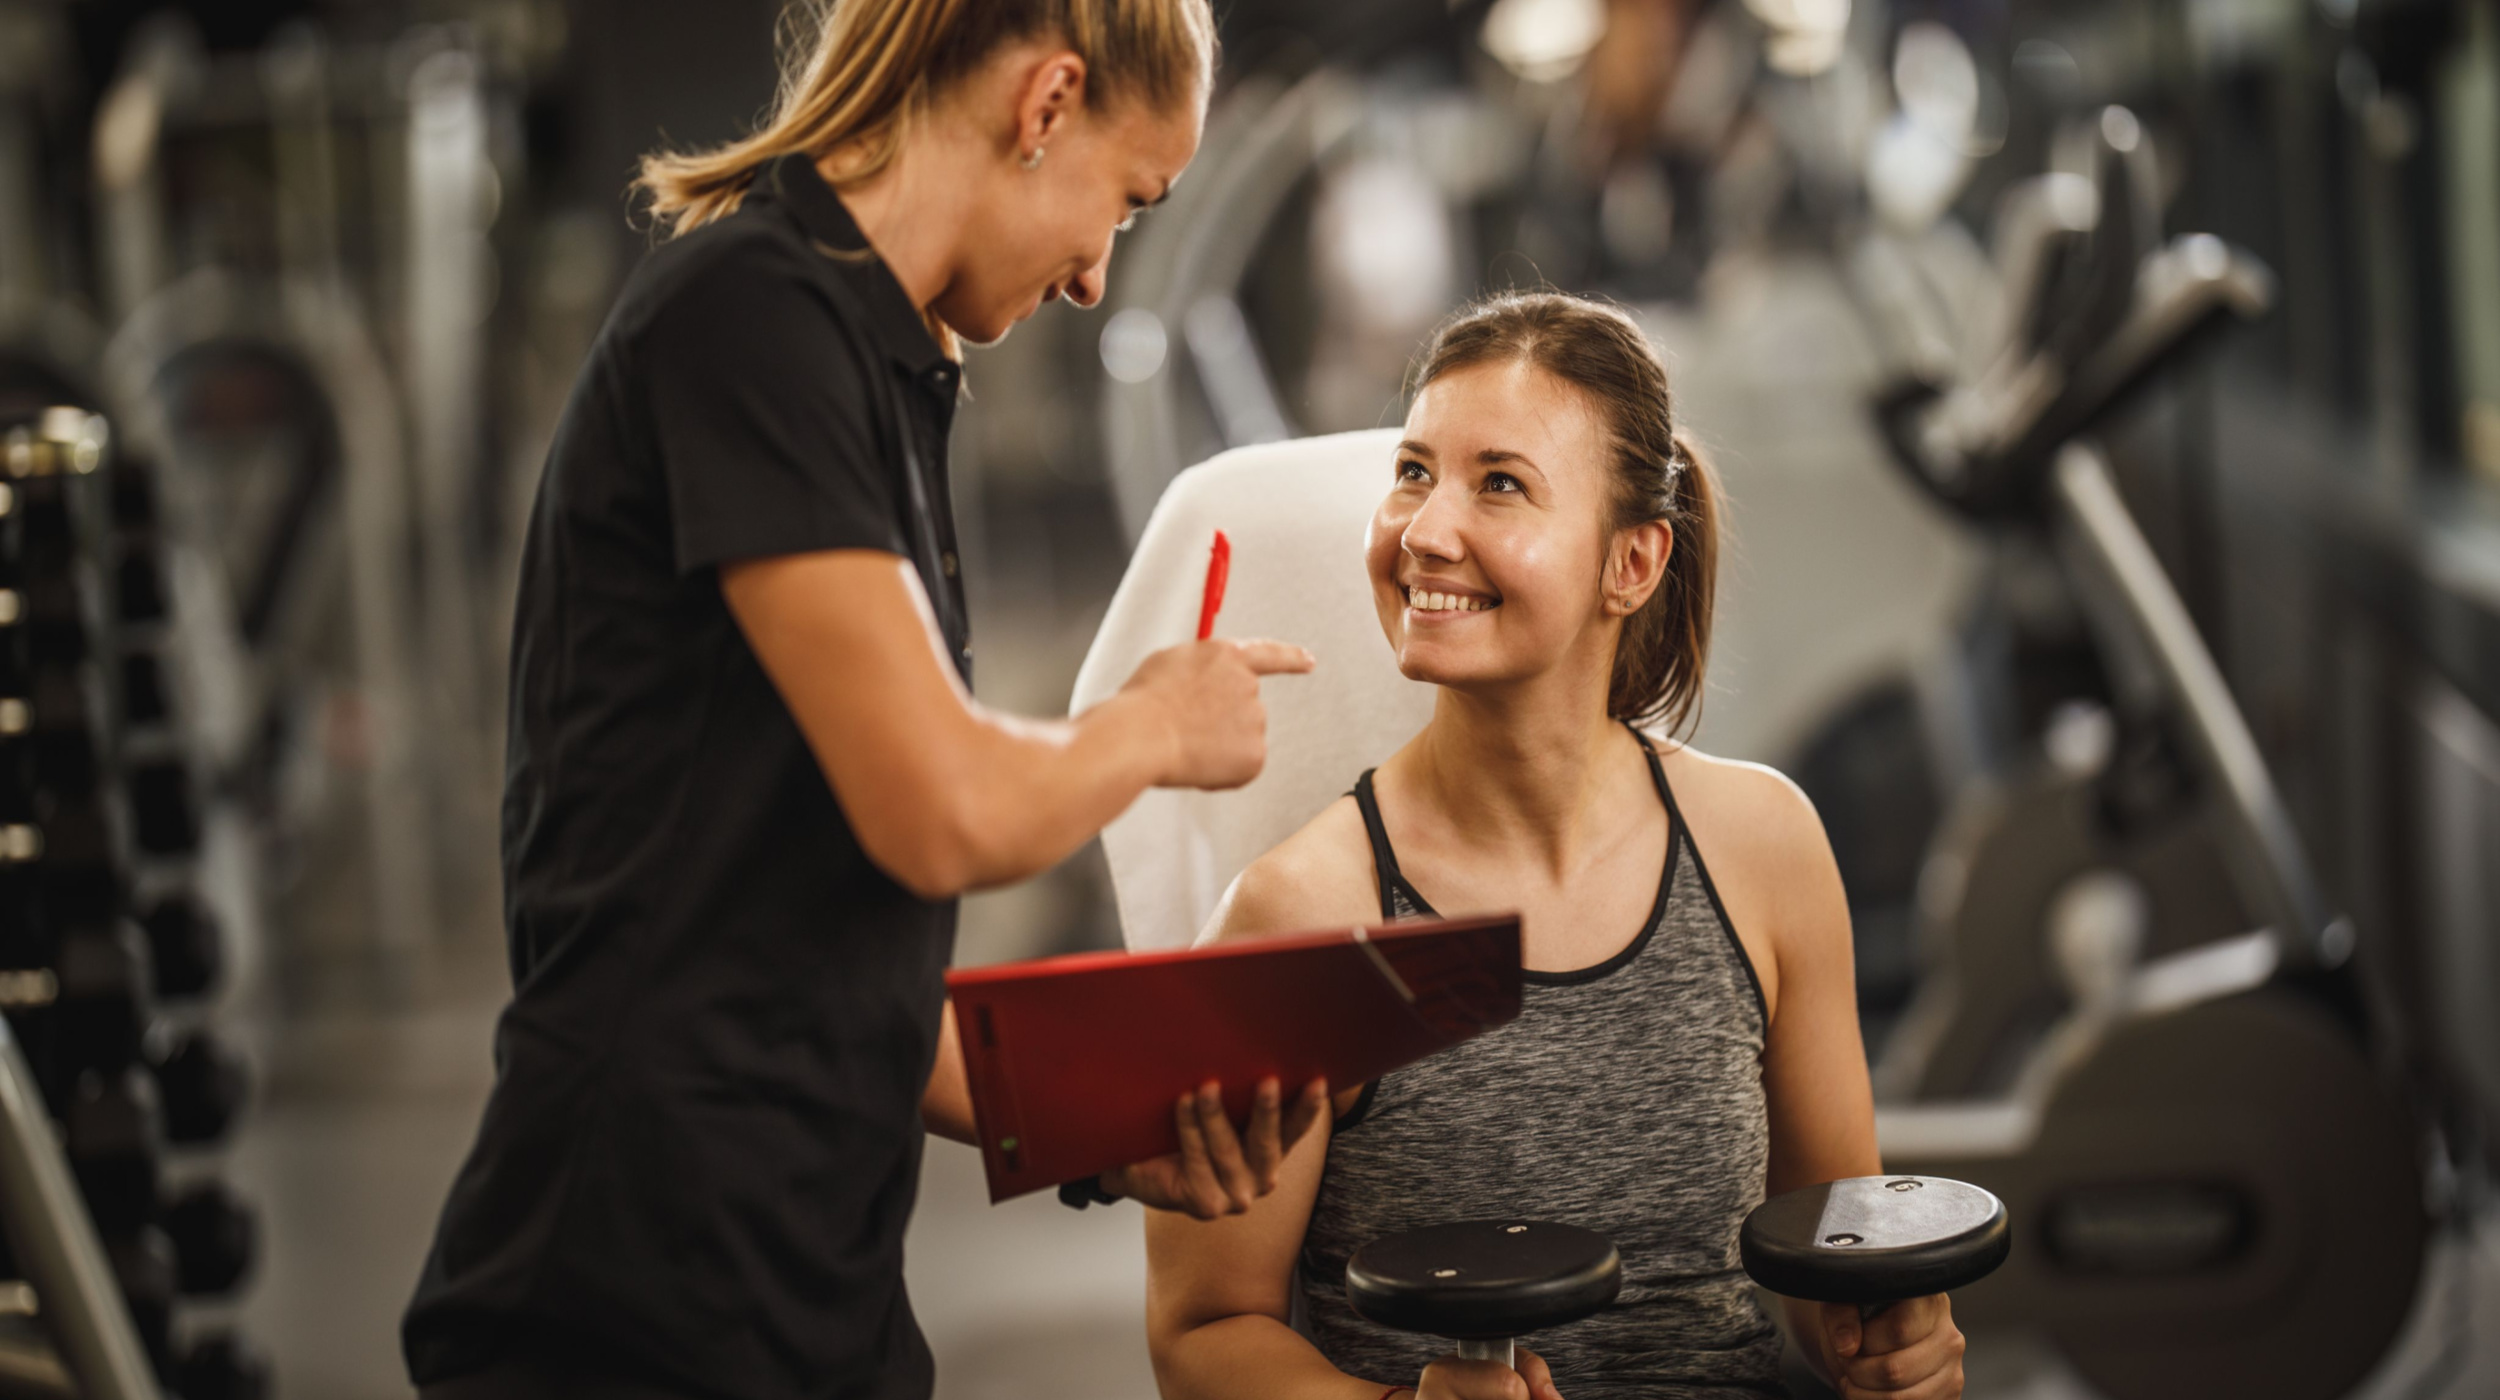 Is Hiring a Personal Trainer a Good Investment if You Want to Lose Weight?